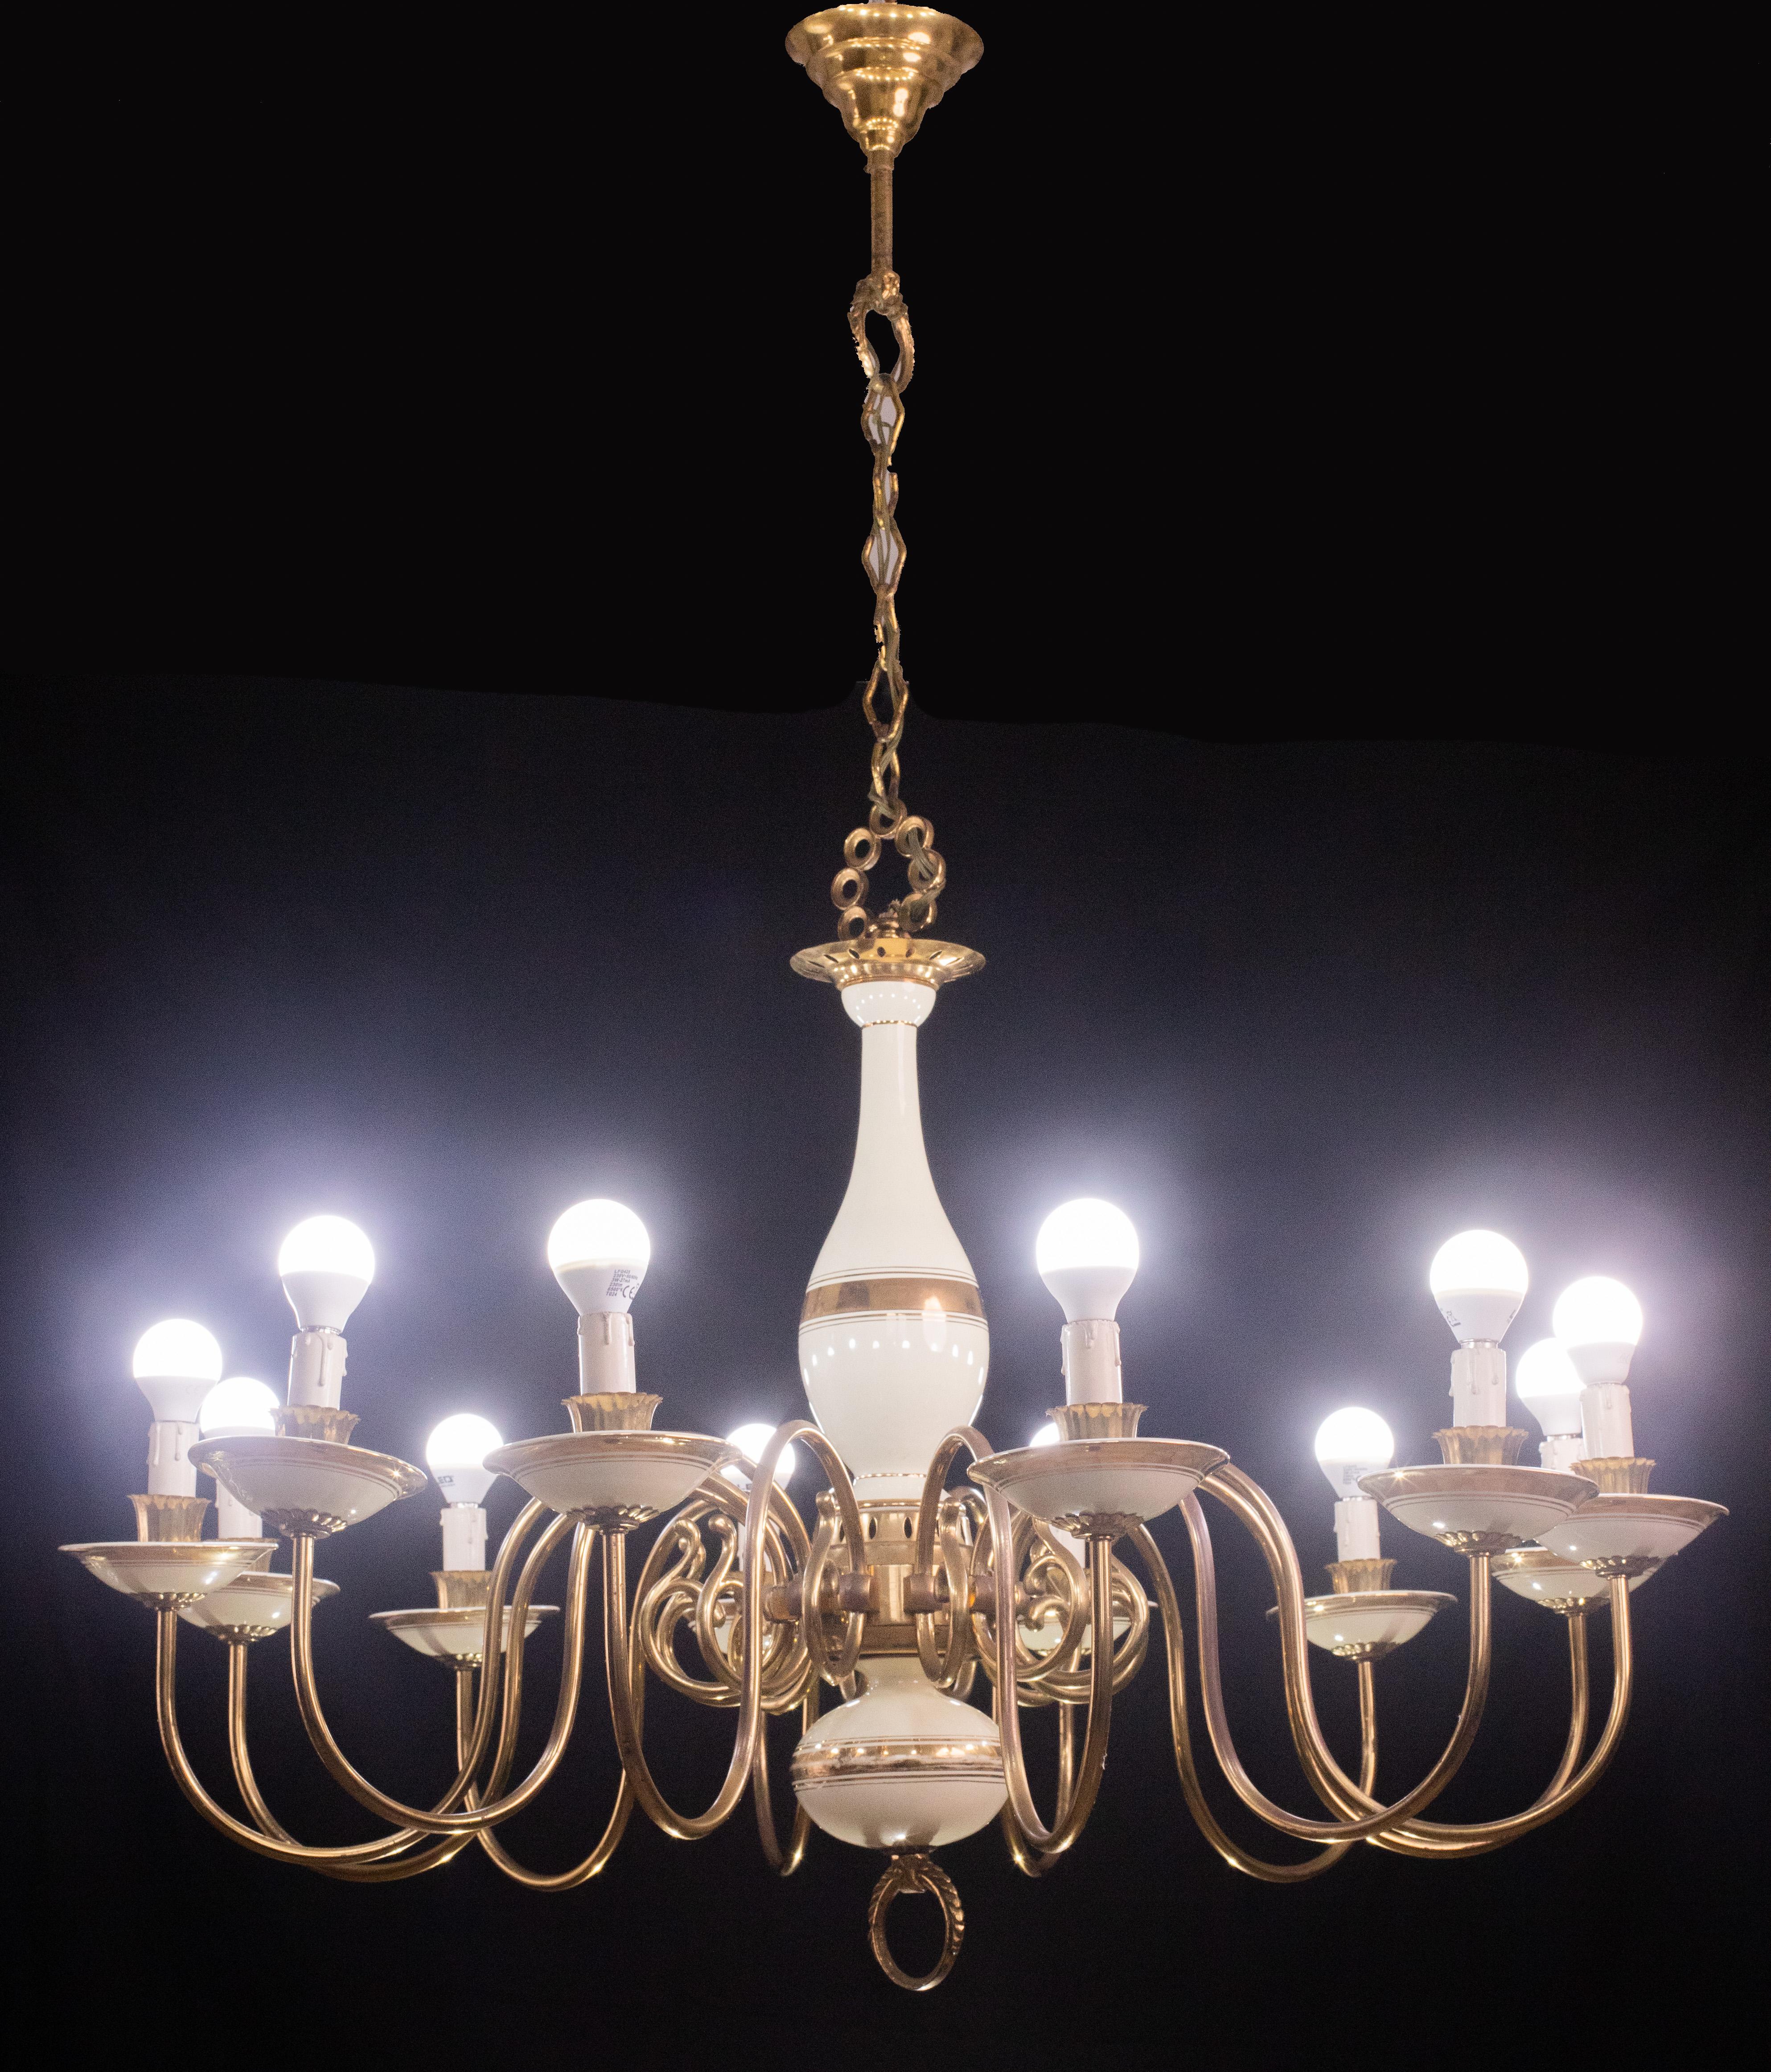 Monumental 12 Lights Art Deco Brass and Ceramic Chandelier, 1950s For Sale 1